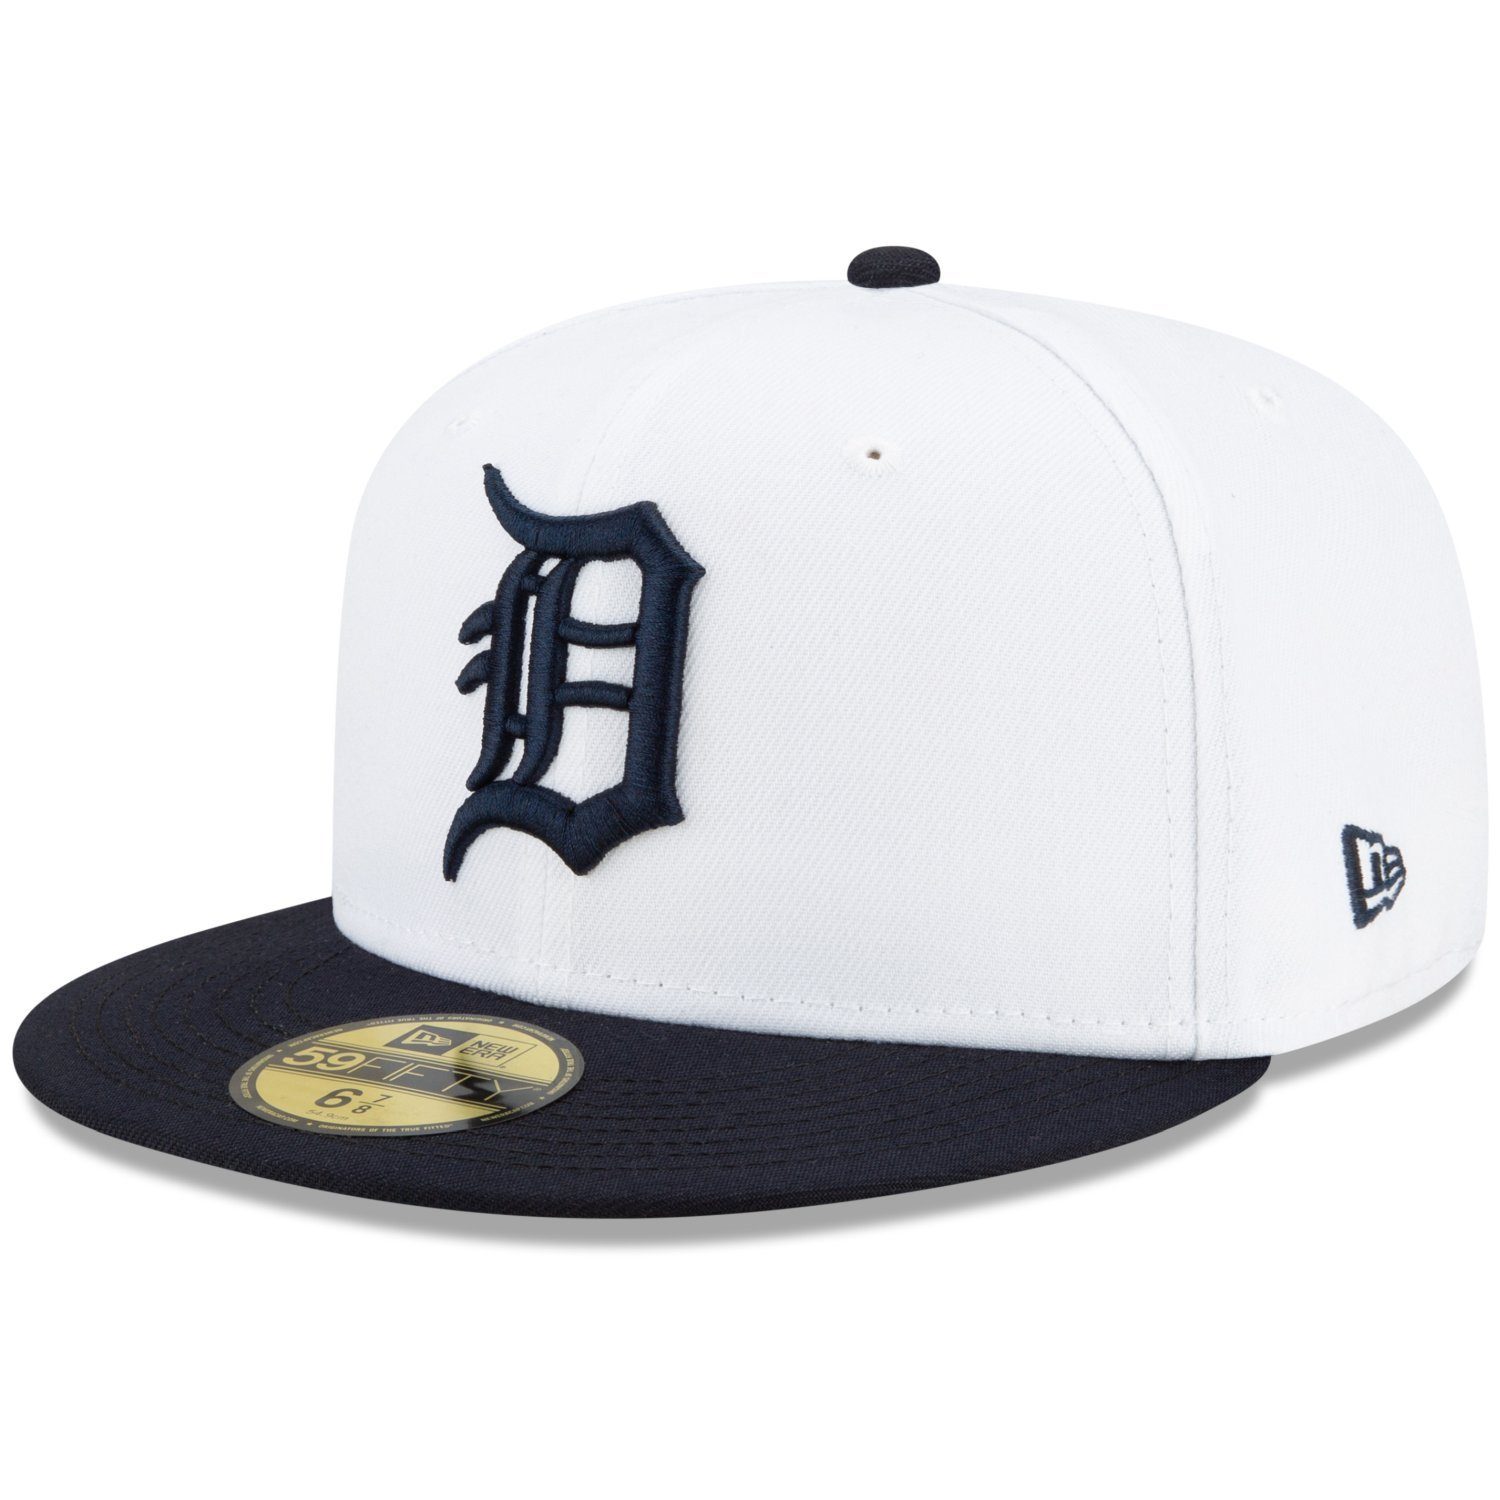 New Era Cap Fitted 59Fifty Tigers WORLD Detroit SERIES 1984